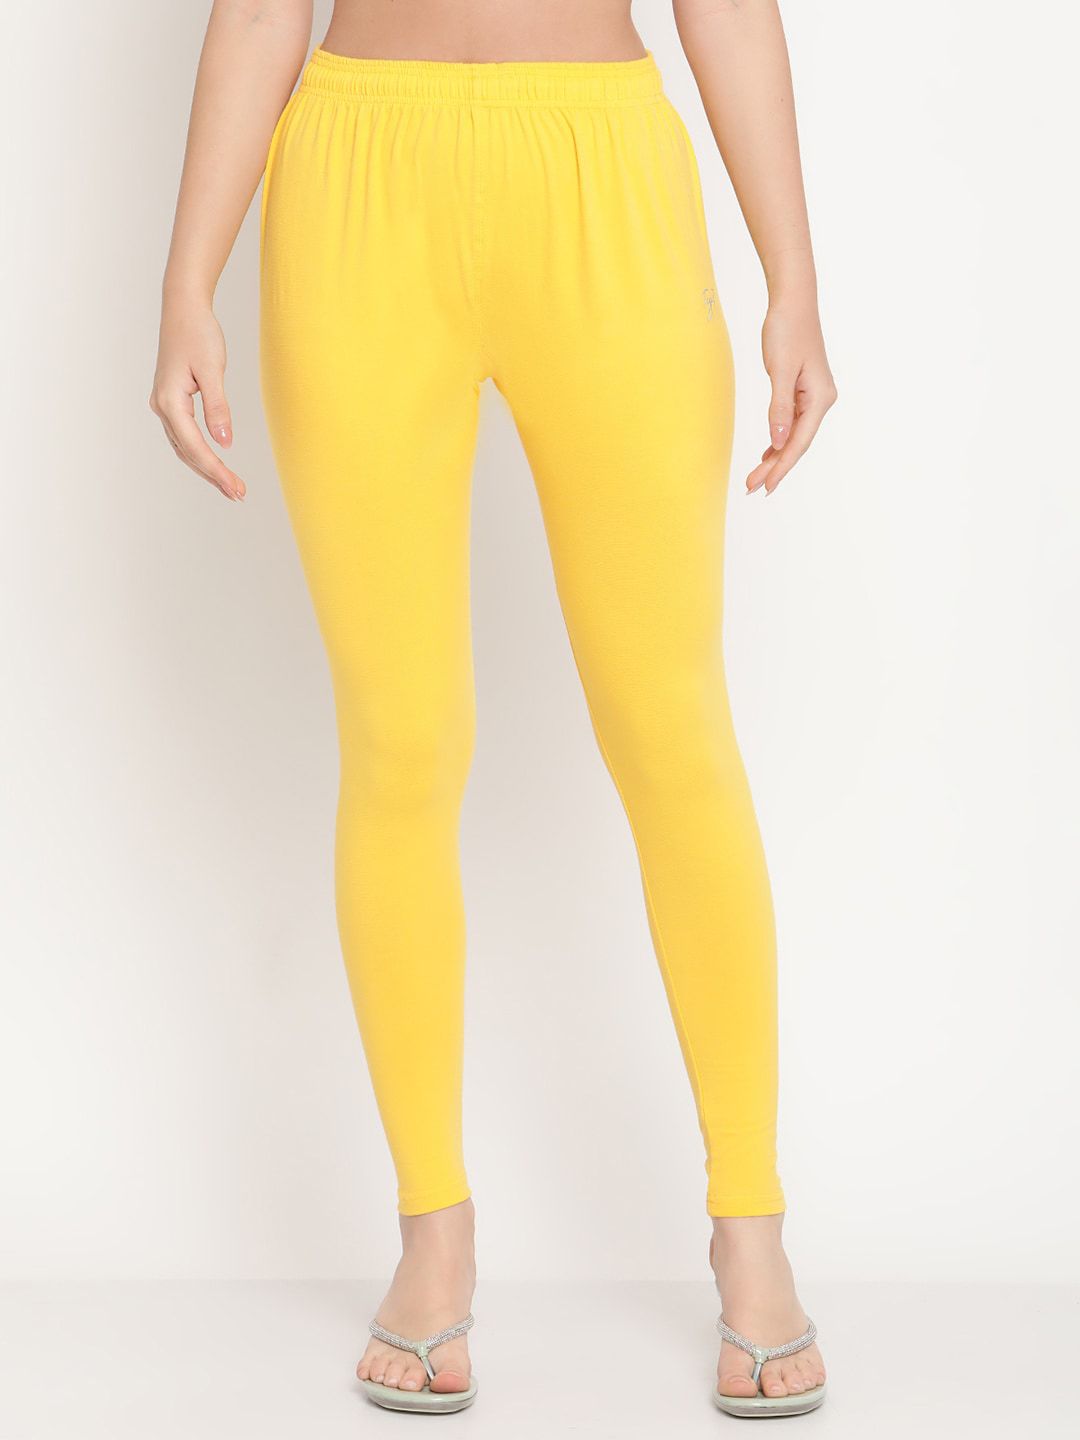 TAG 7 Women Yellow Solid Comfort Fit Ankle Length Leggings Price in India